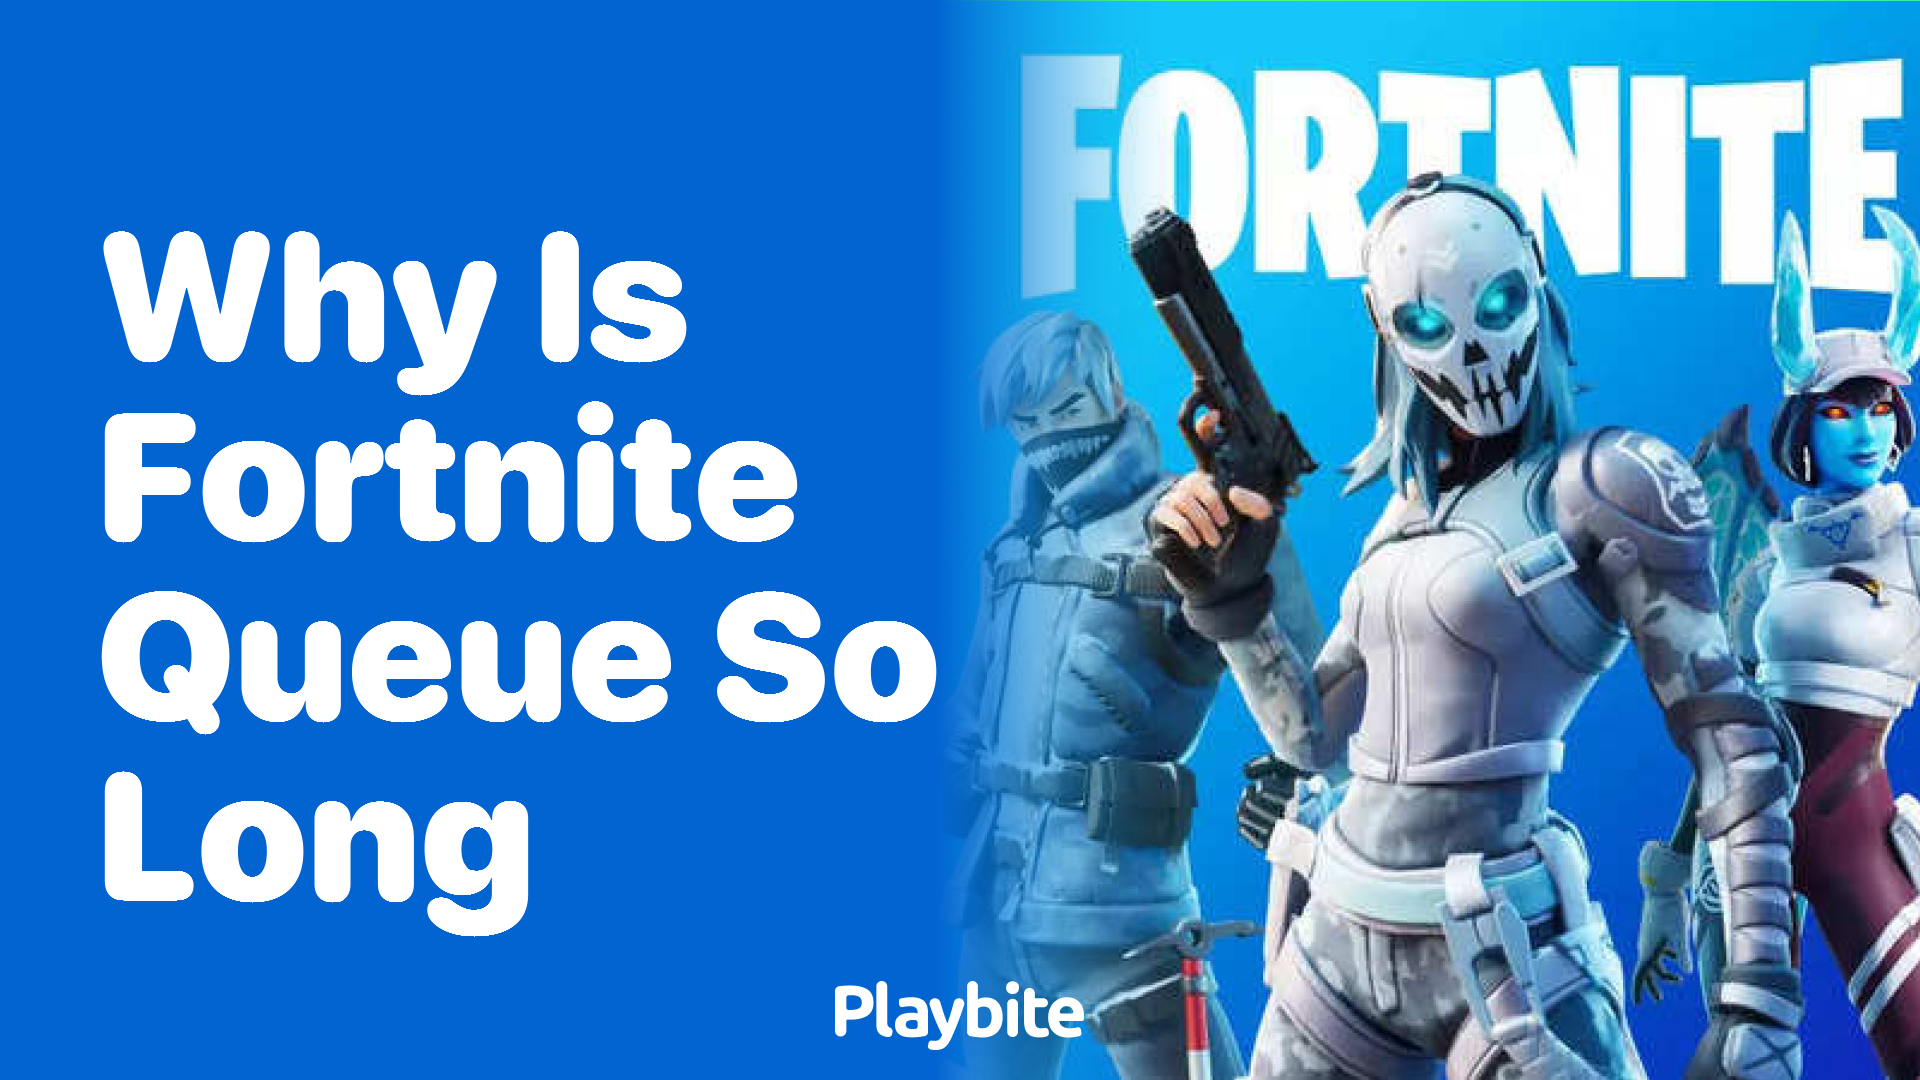 Why Is the Fortnite Queue So Long? Let&#8217;s Find Out!